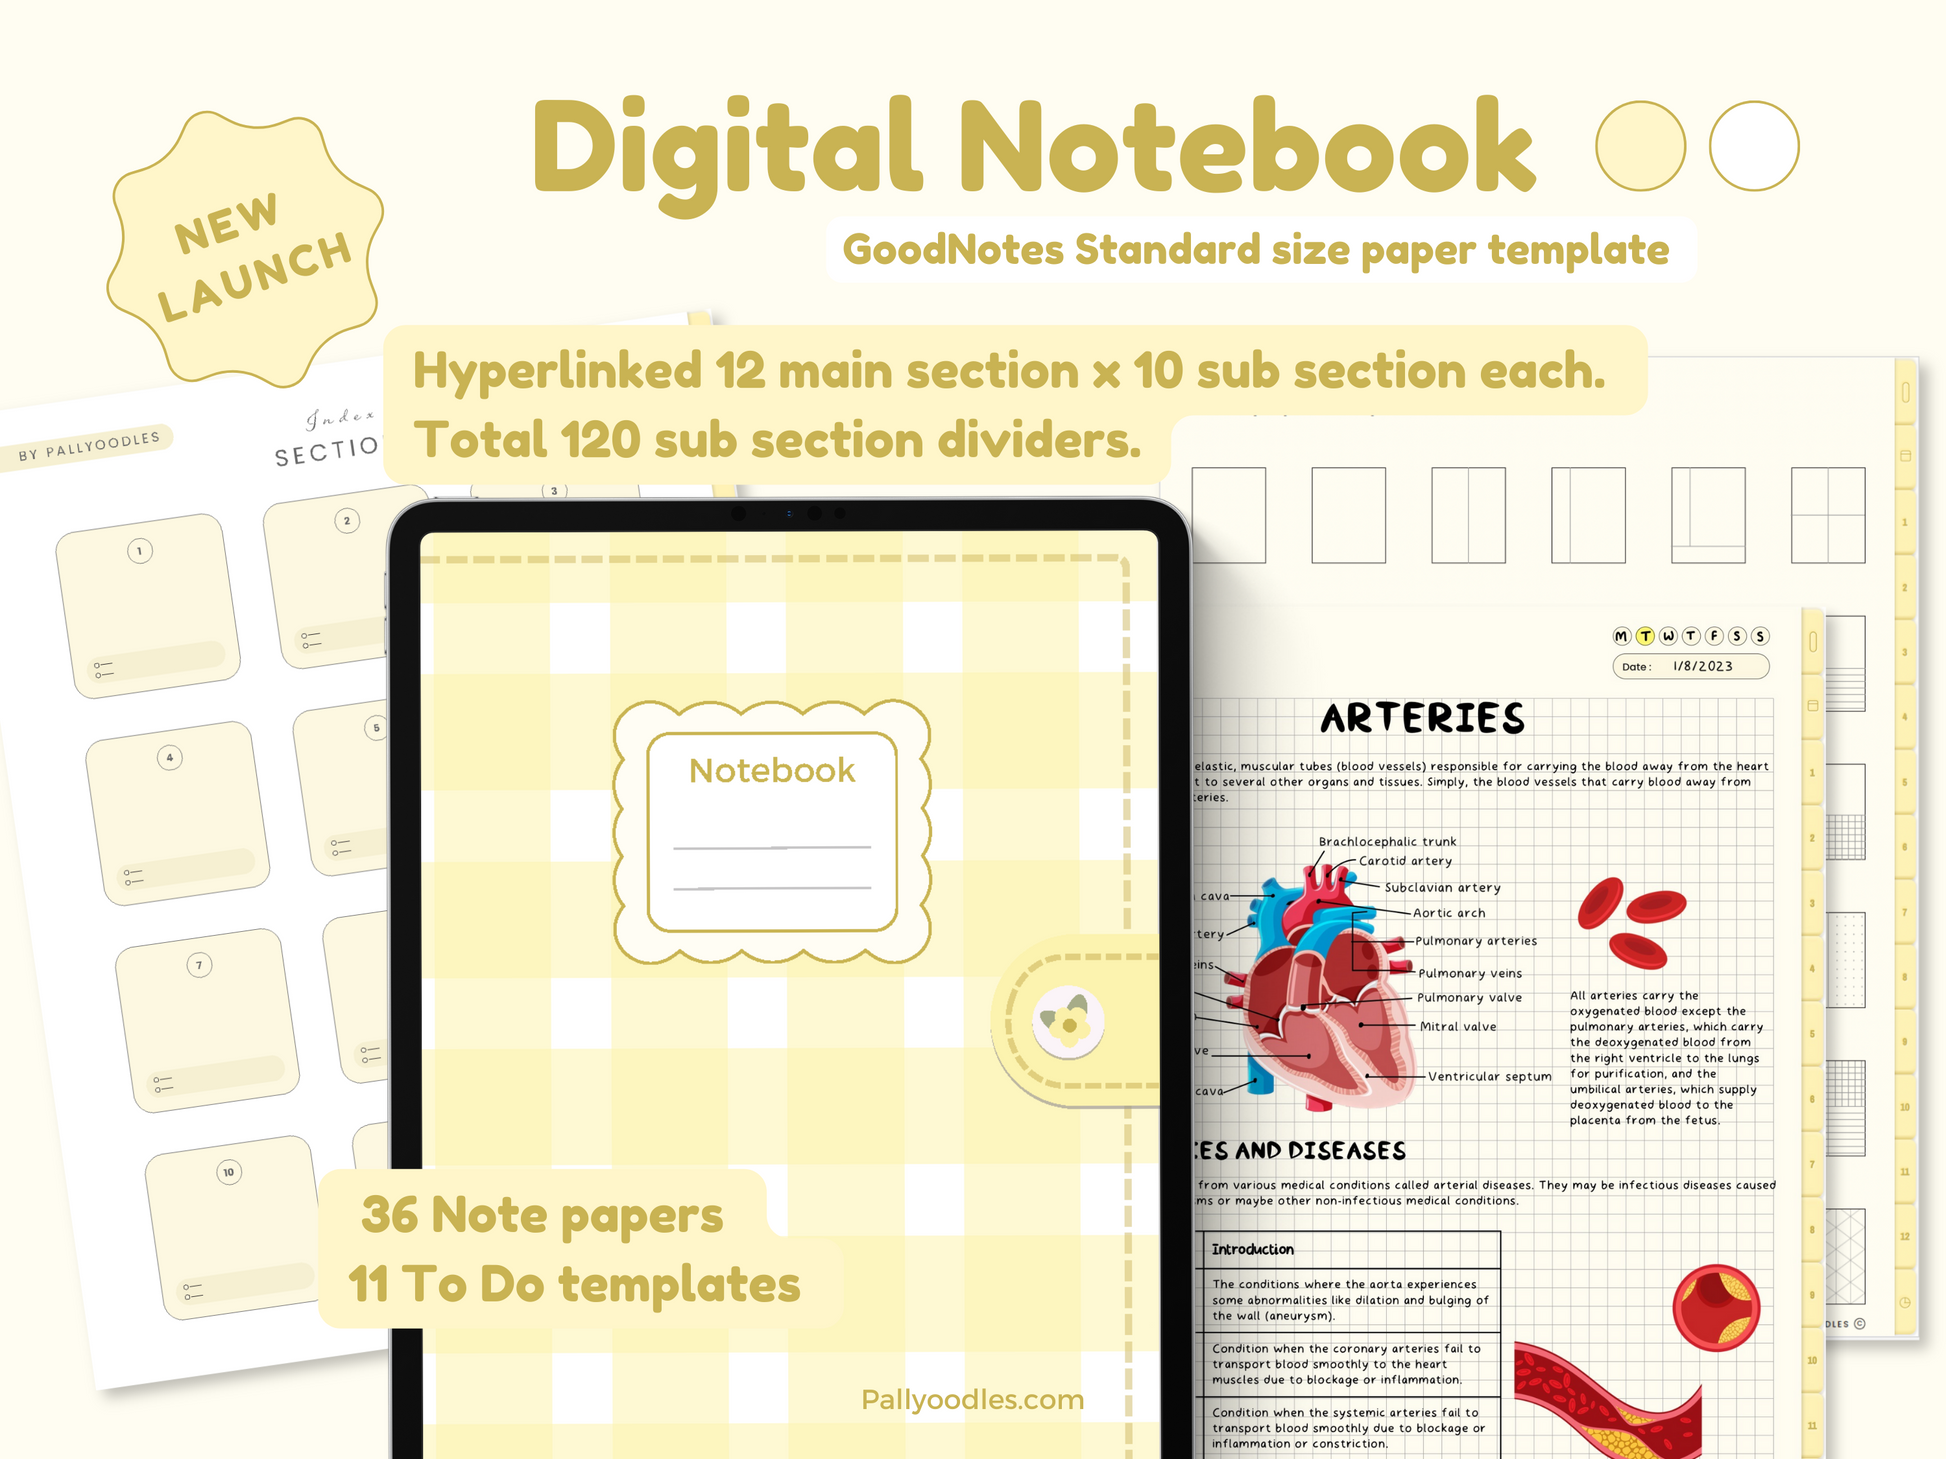 Portrait Digital Notebook with Tabs, Goodnotes Notebook, Student Notebook, Digital Notebooks, Digital Notes Templates, Notability Notebook